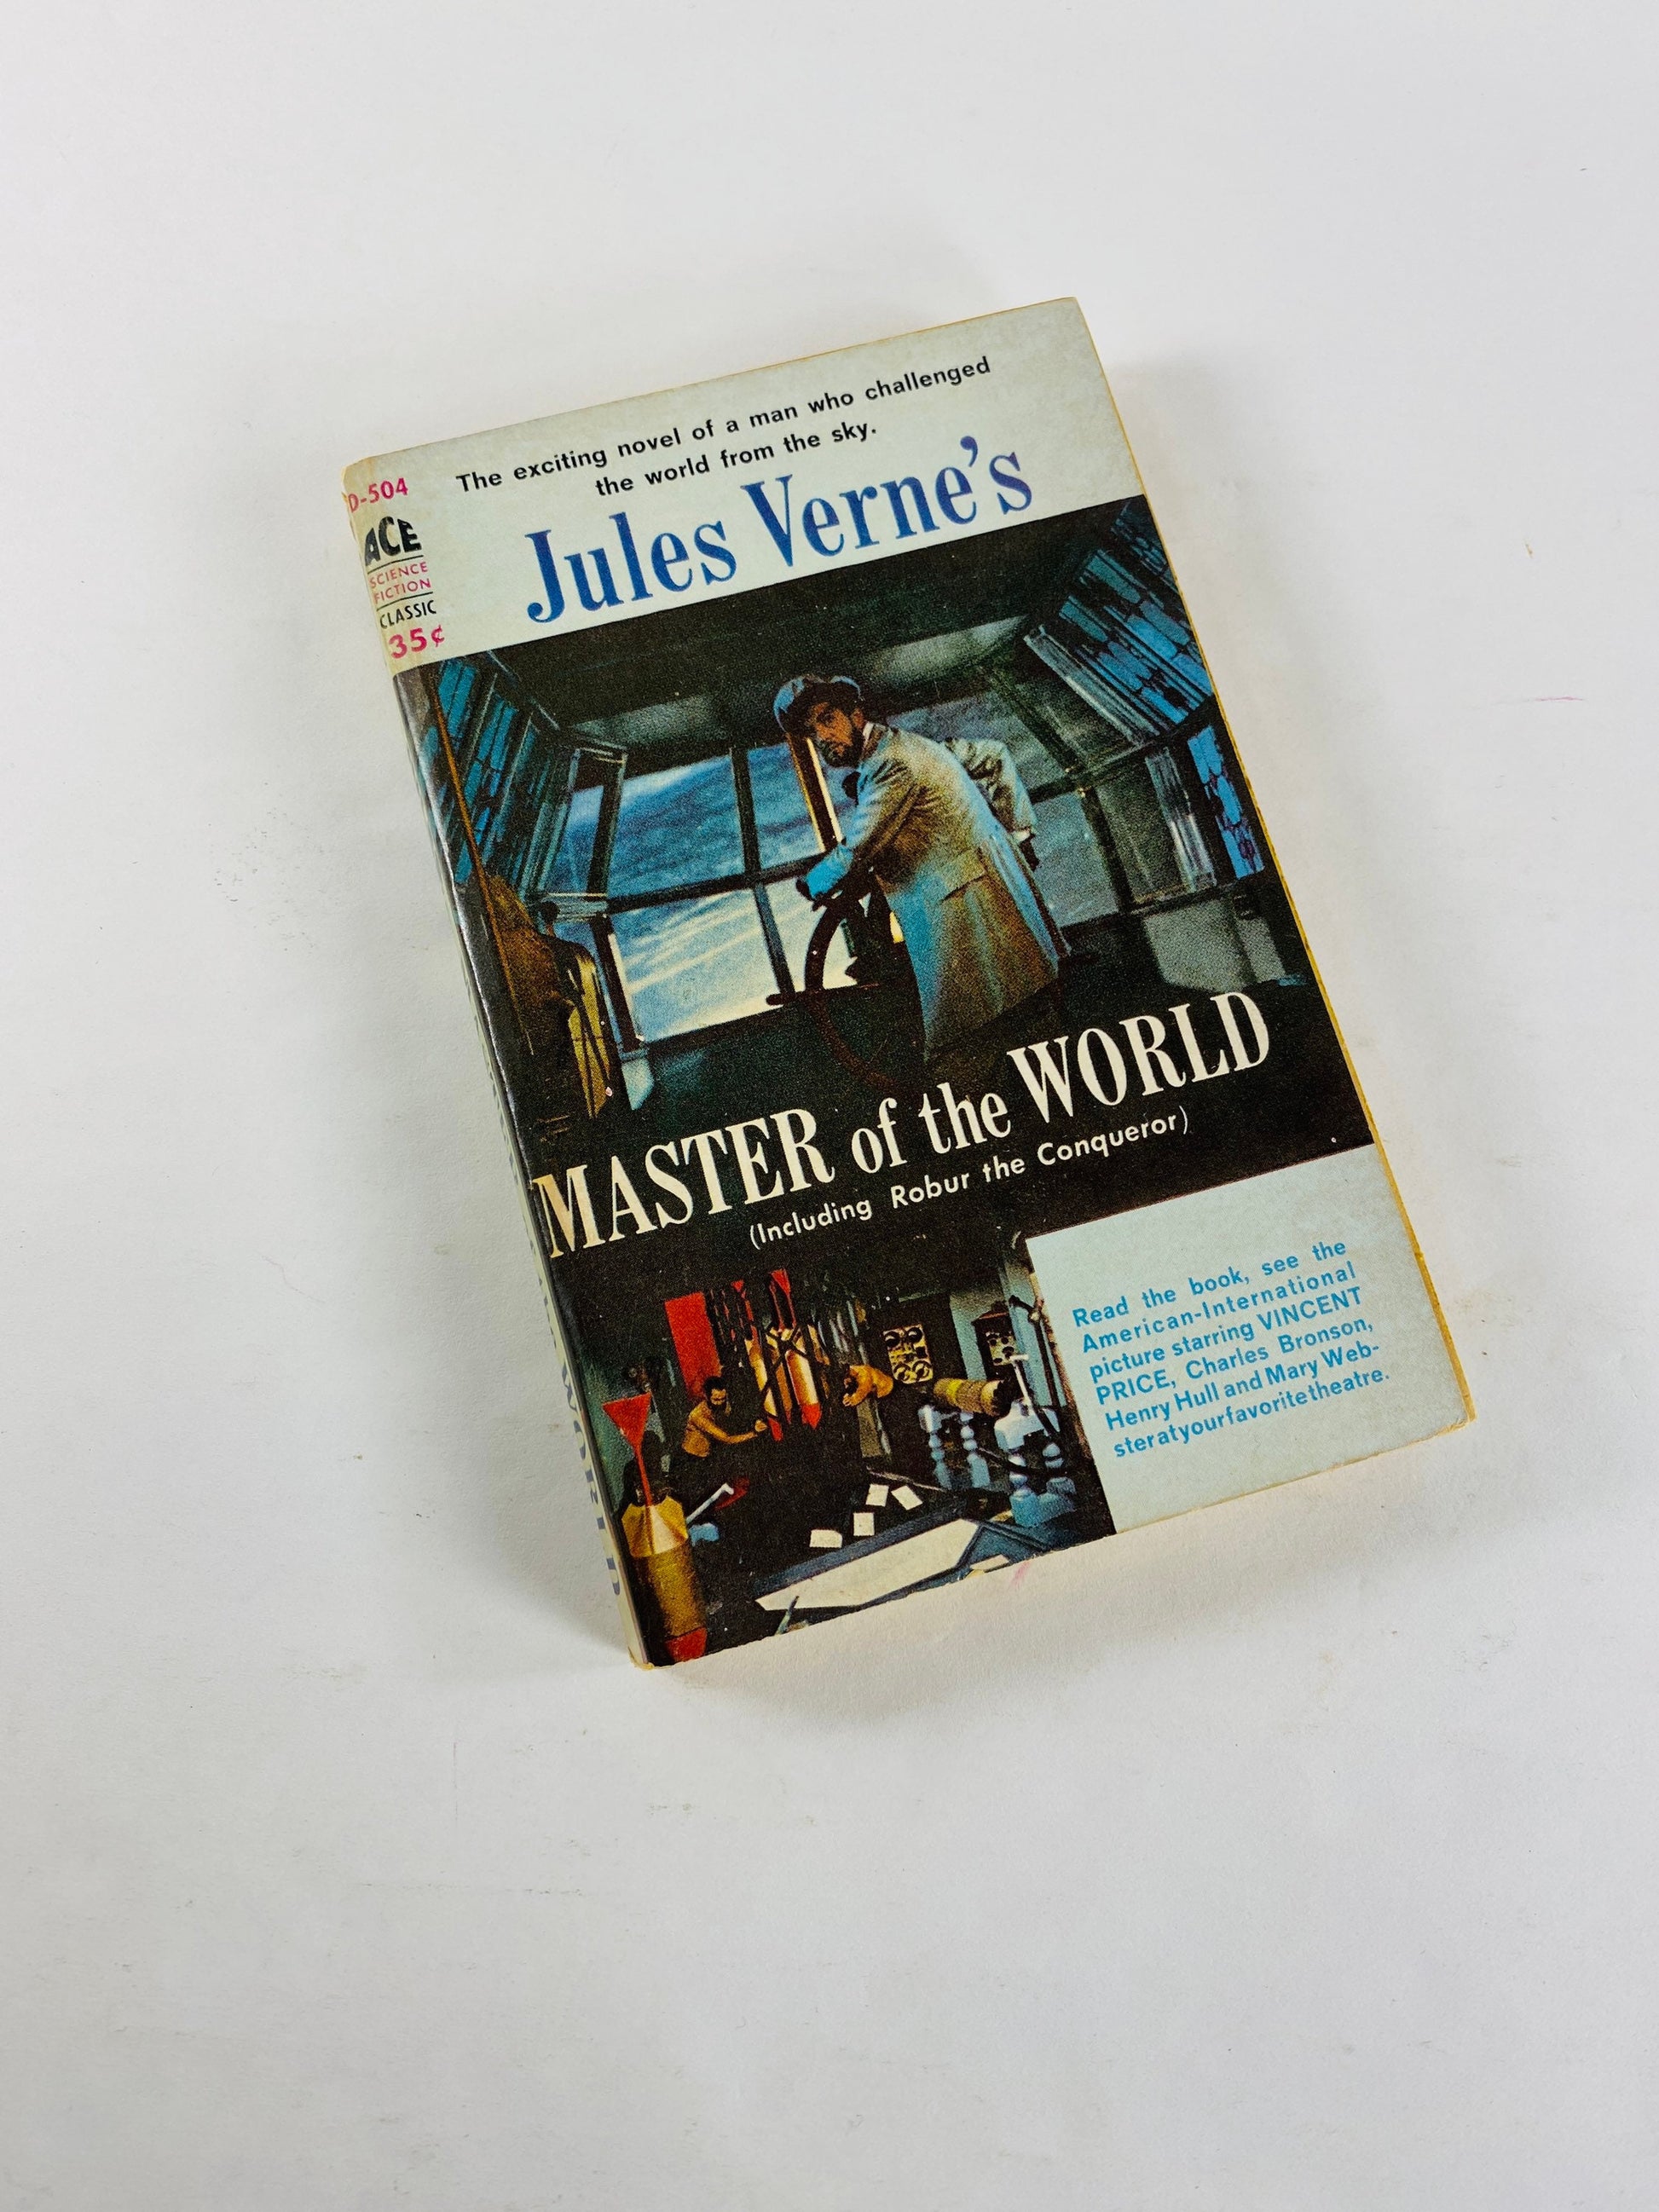 1951 Jules Verne Master of the World vintage paperback book by author of Twenty Thousand Leagues Under the Sea. Ace Science Fiction Classic